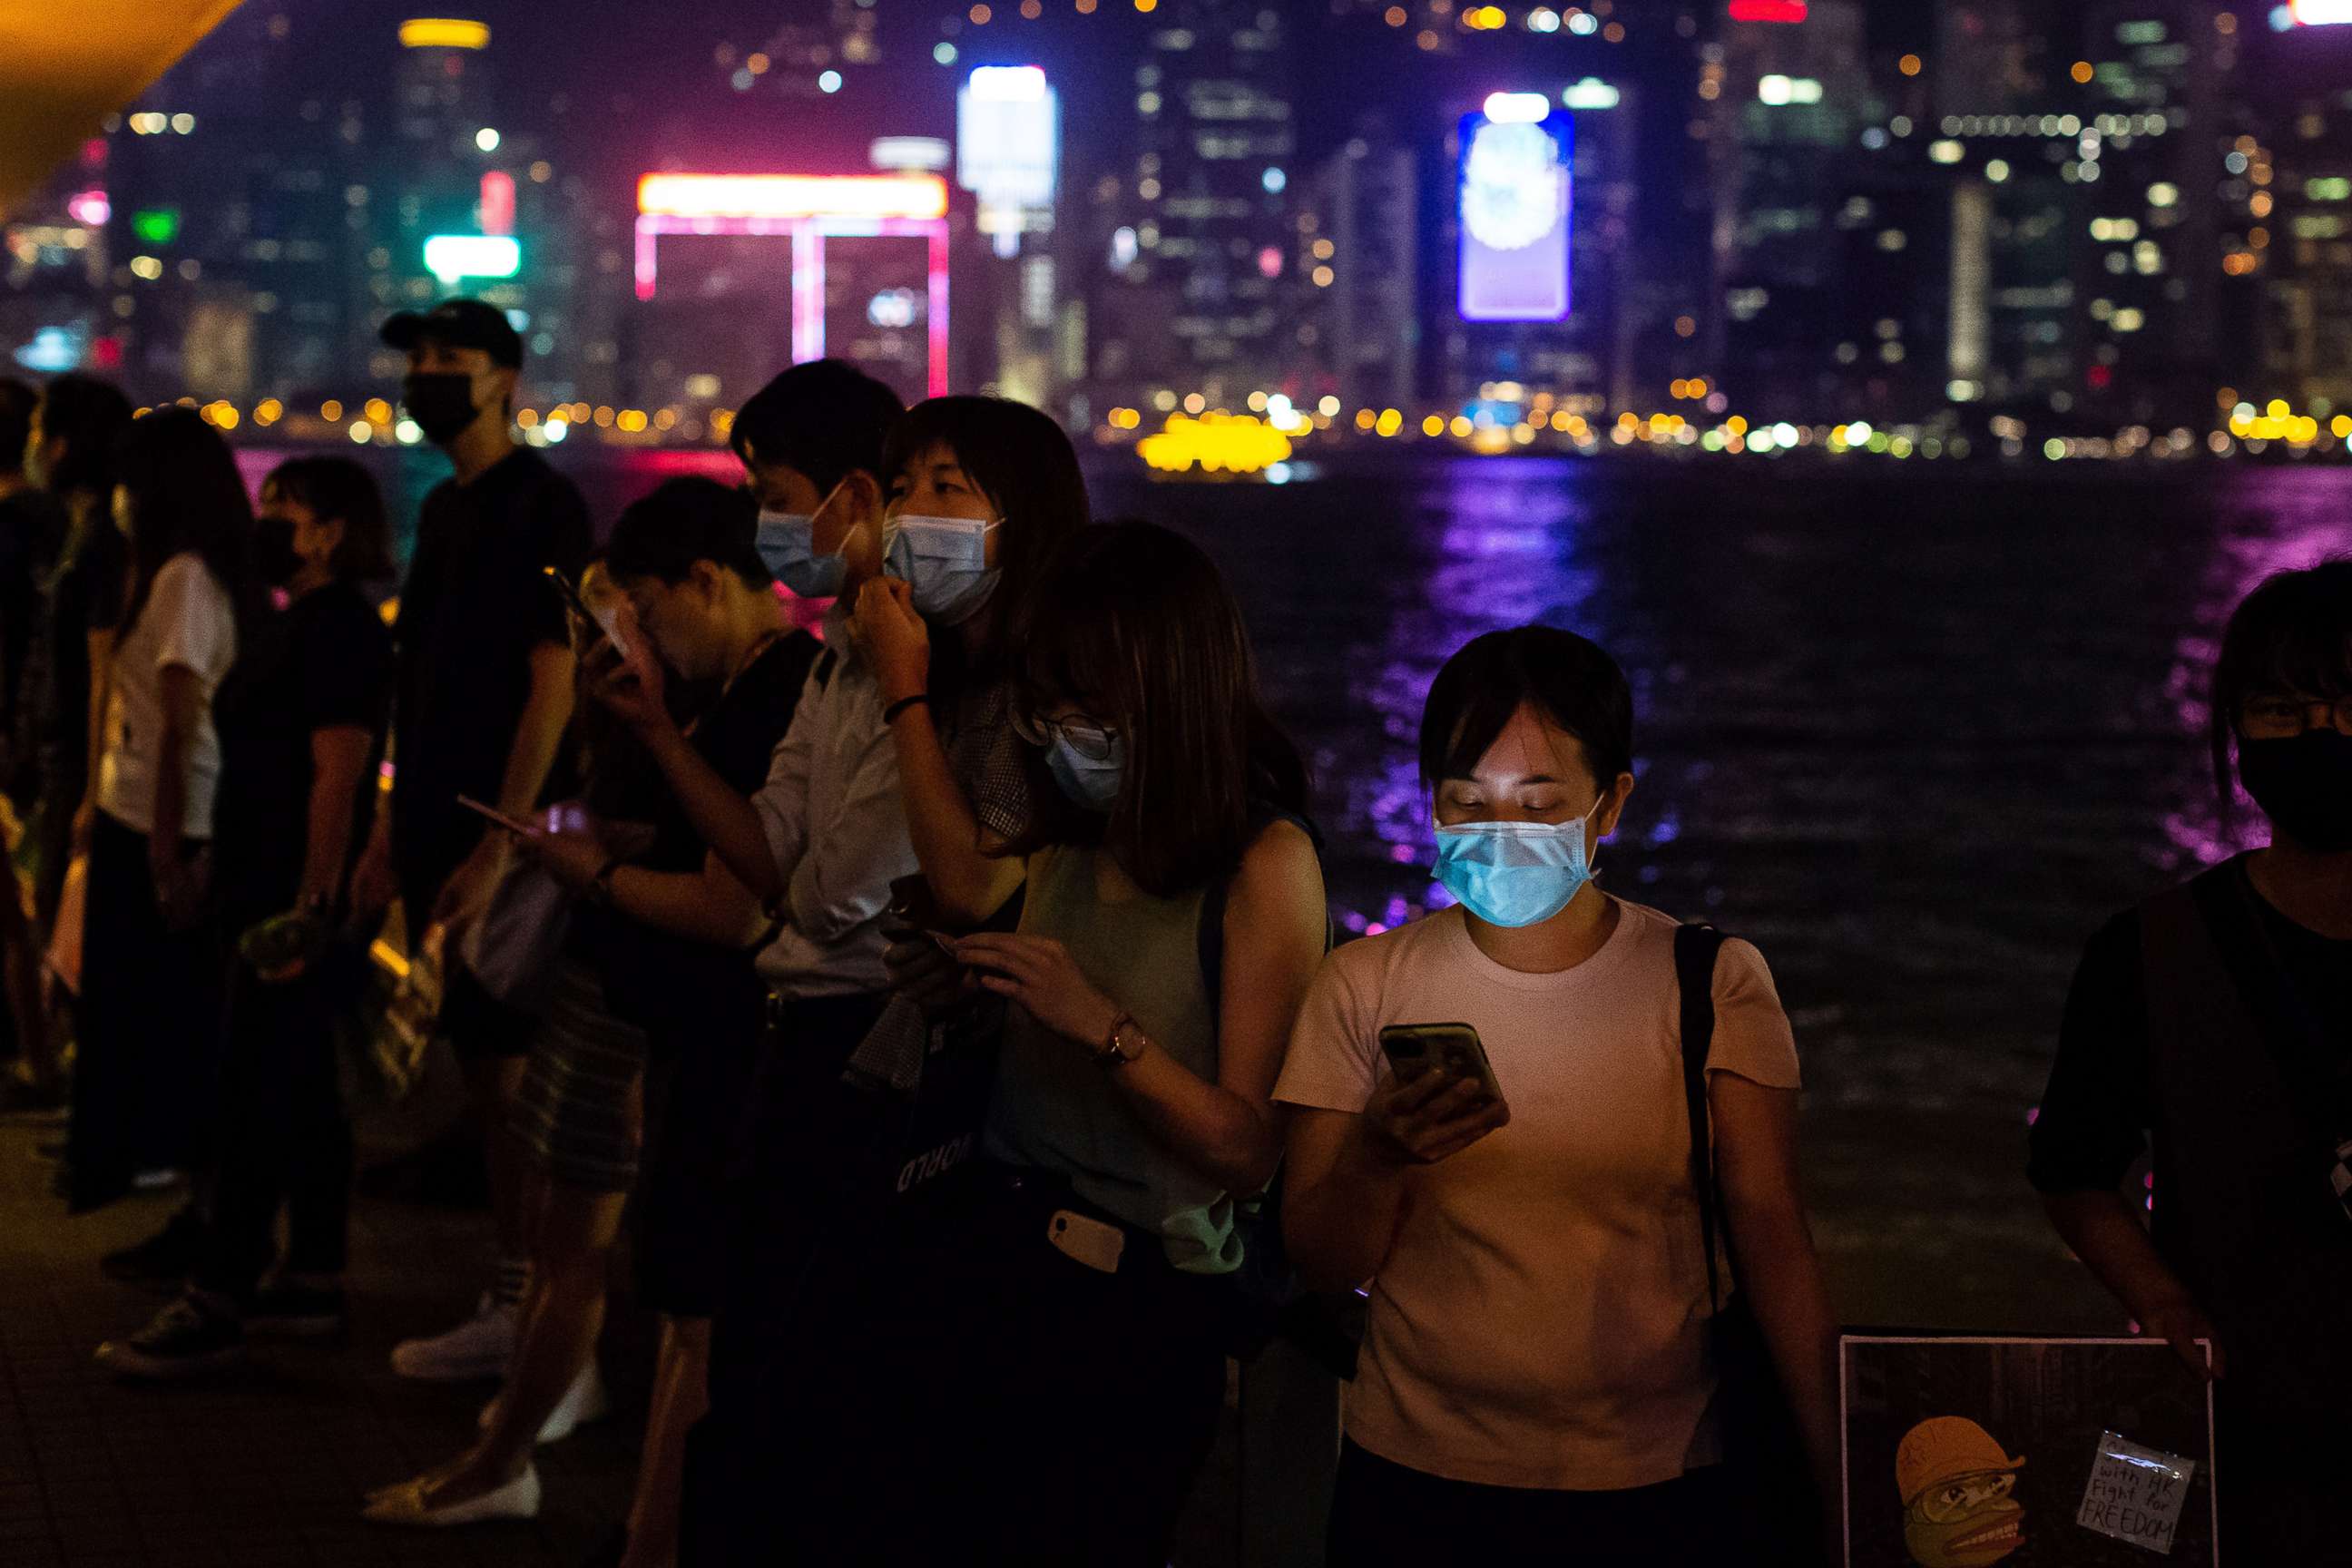 PHOTO: Demonstrators hold smartphones while forming a human chain during a protest in the Tsim Sha Tsui district of Hong Kong, Sept. 30, 2019.